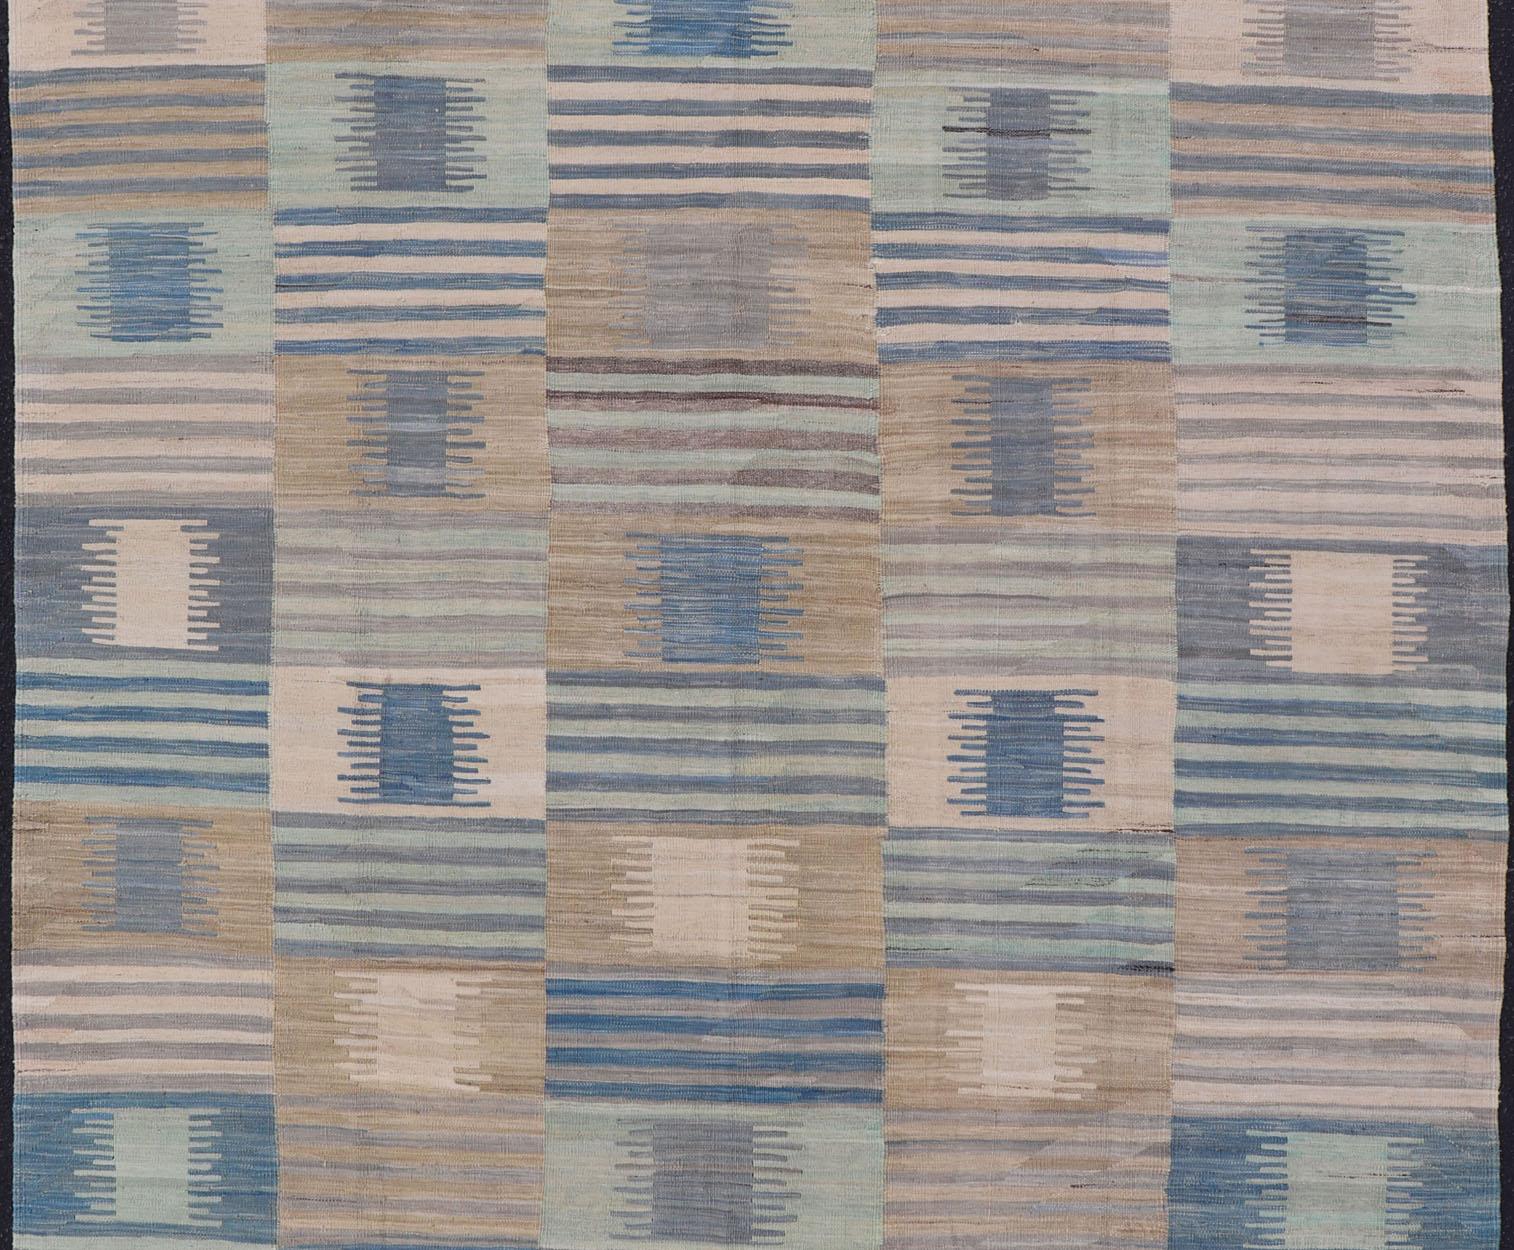 Hand-Woven Flat-Weave Afghan Kilim Rug with Modern Design in Blues, Taupe, and Cream For Sale